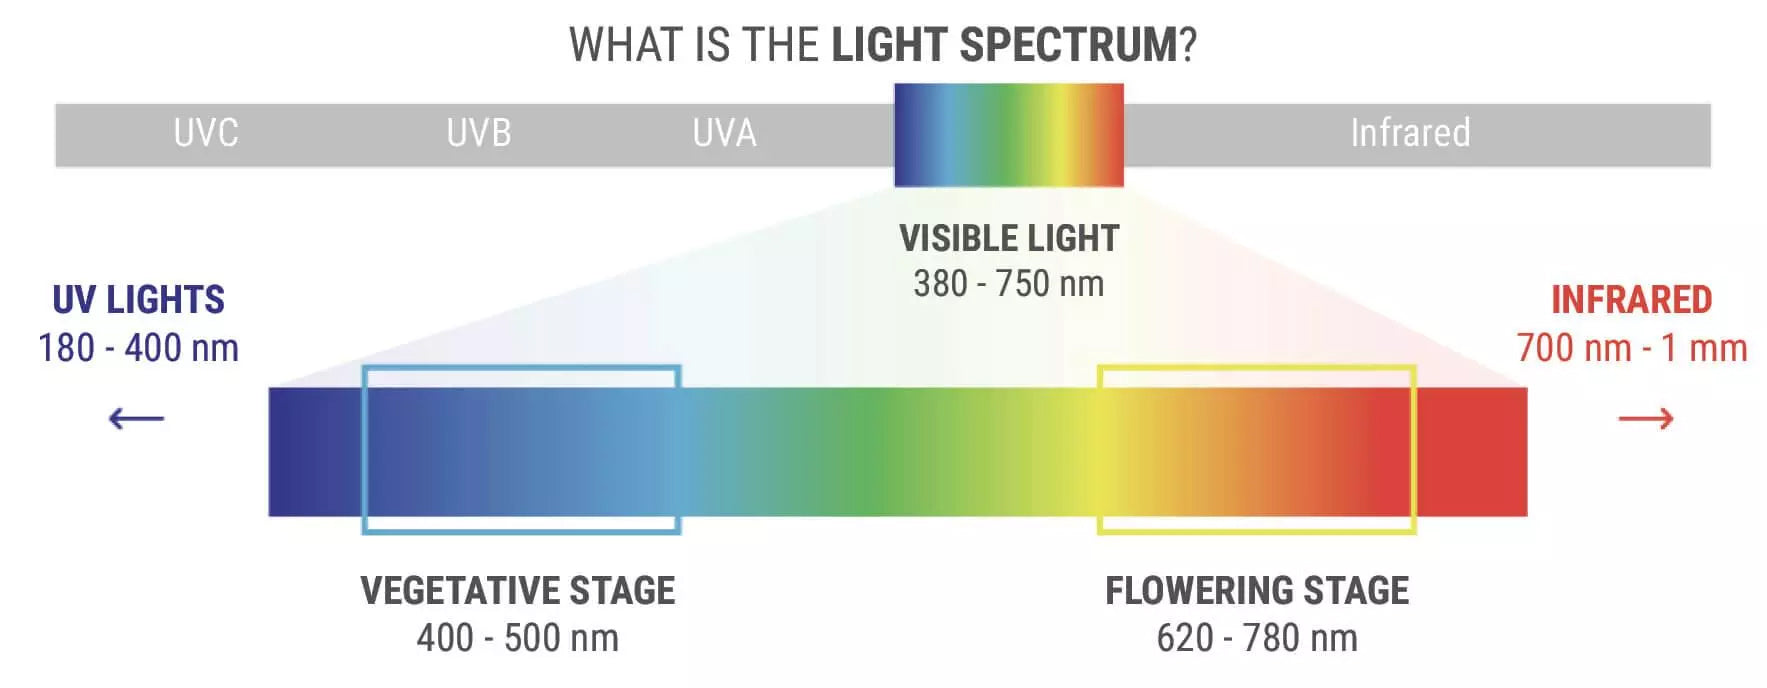 what is the light spectrum